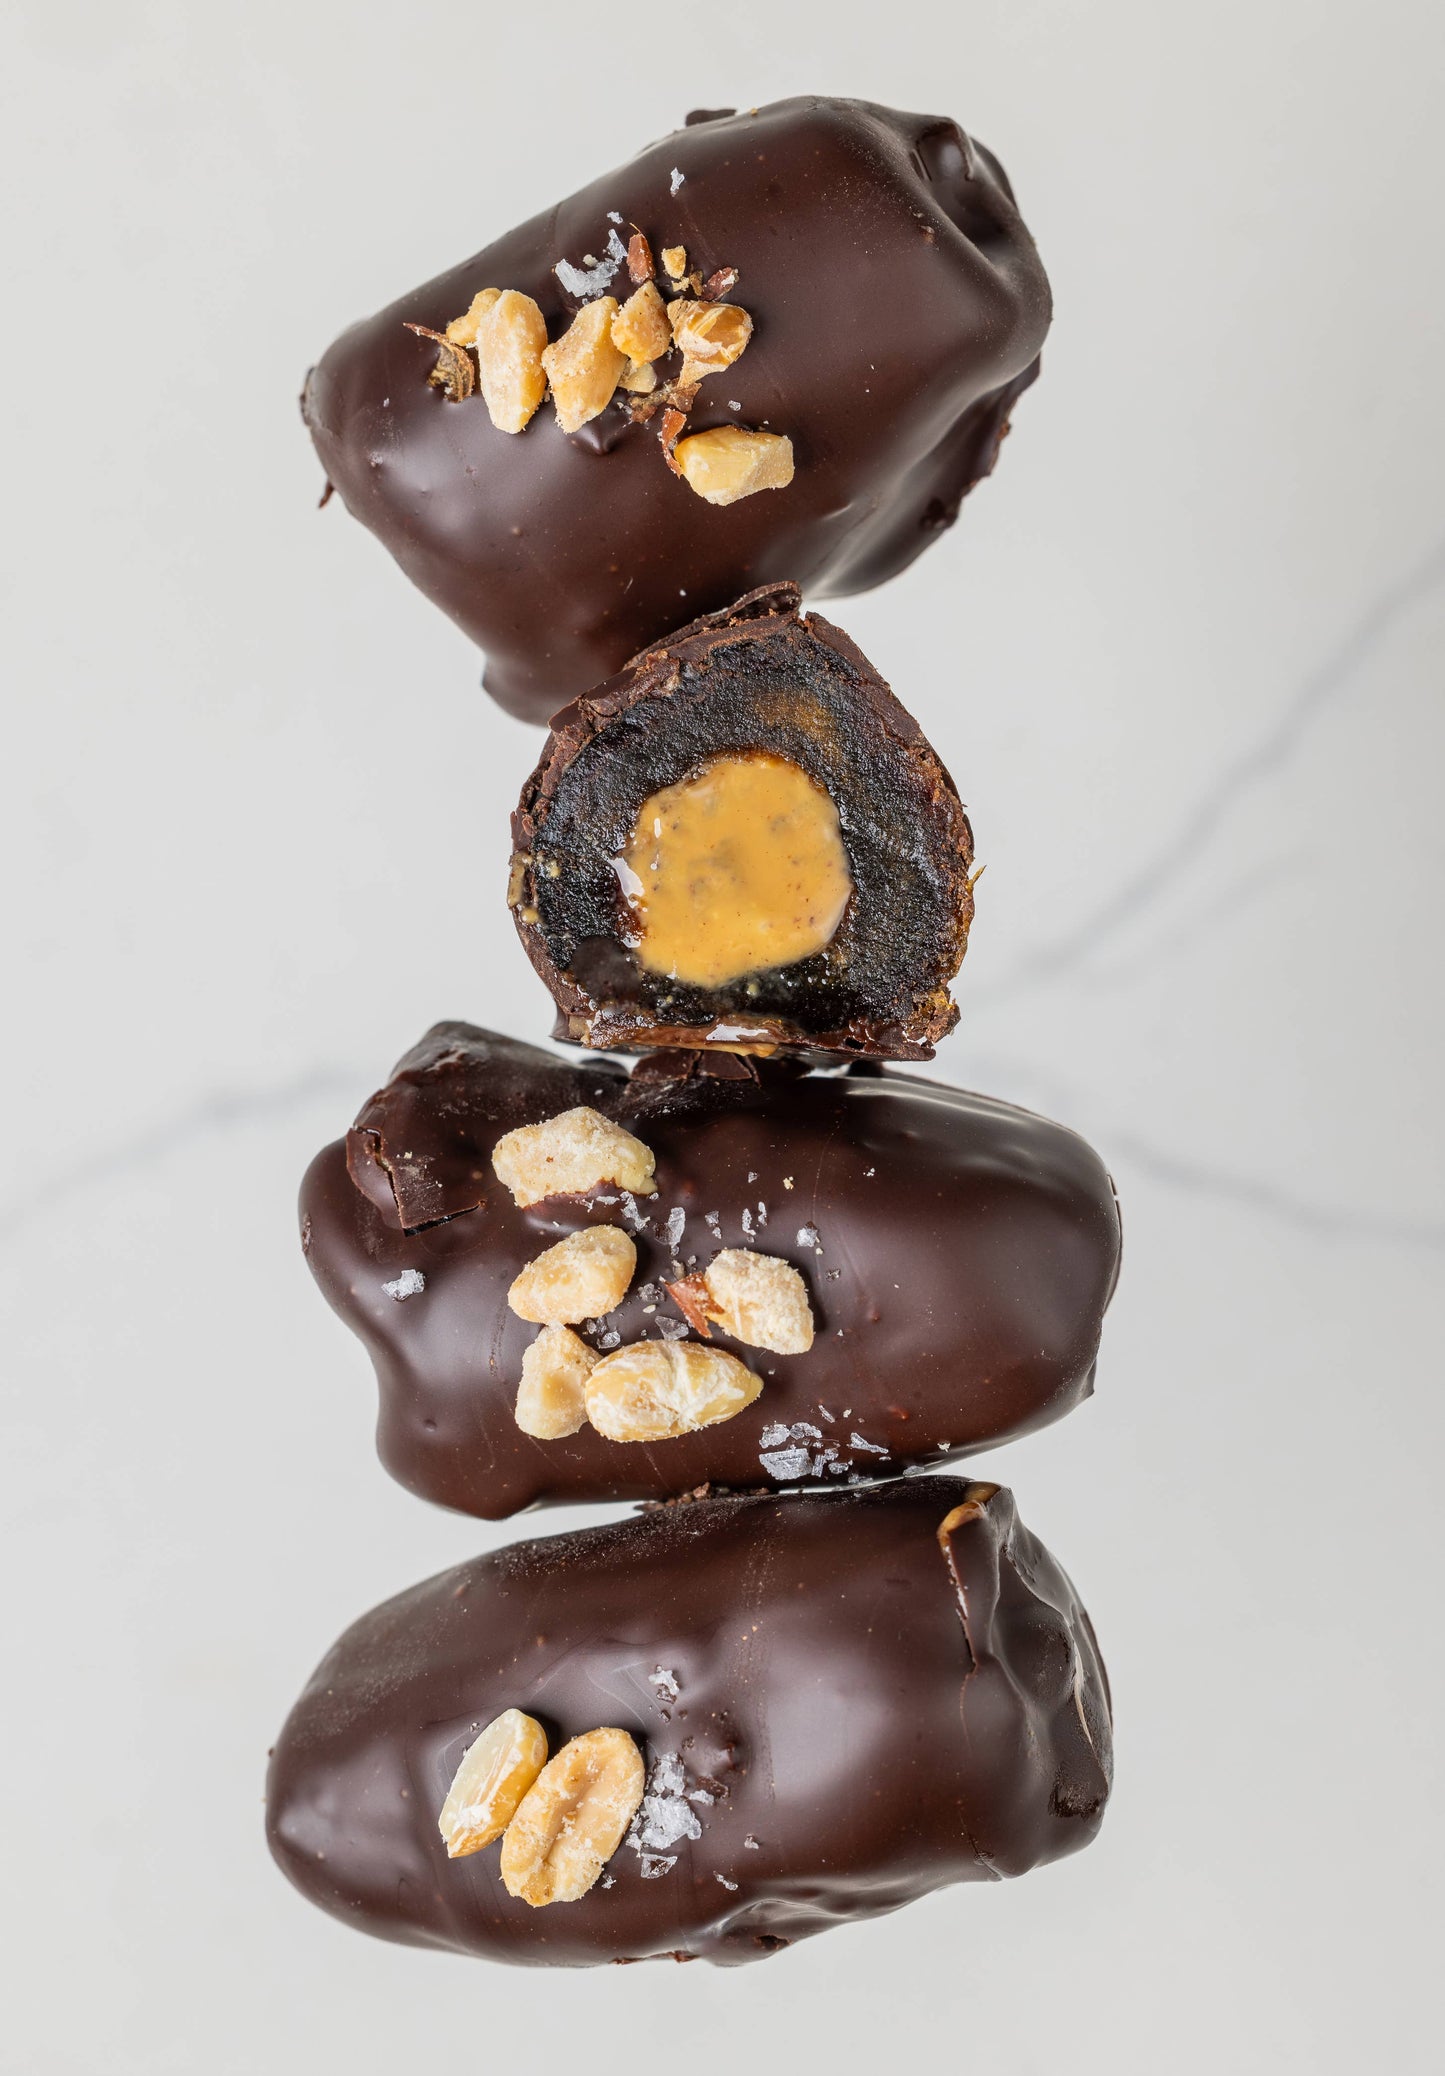 Date Better Peanut Butter Crunch Chocolate Covered Dates